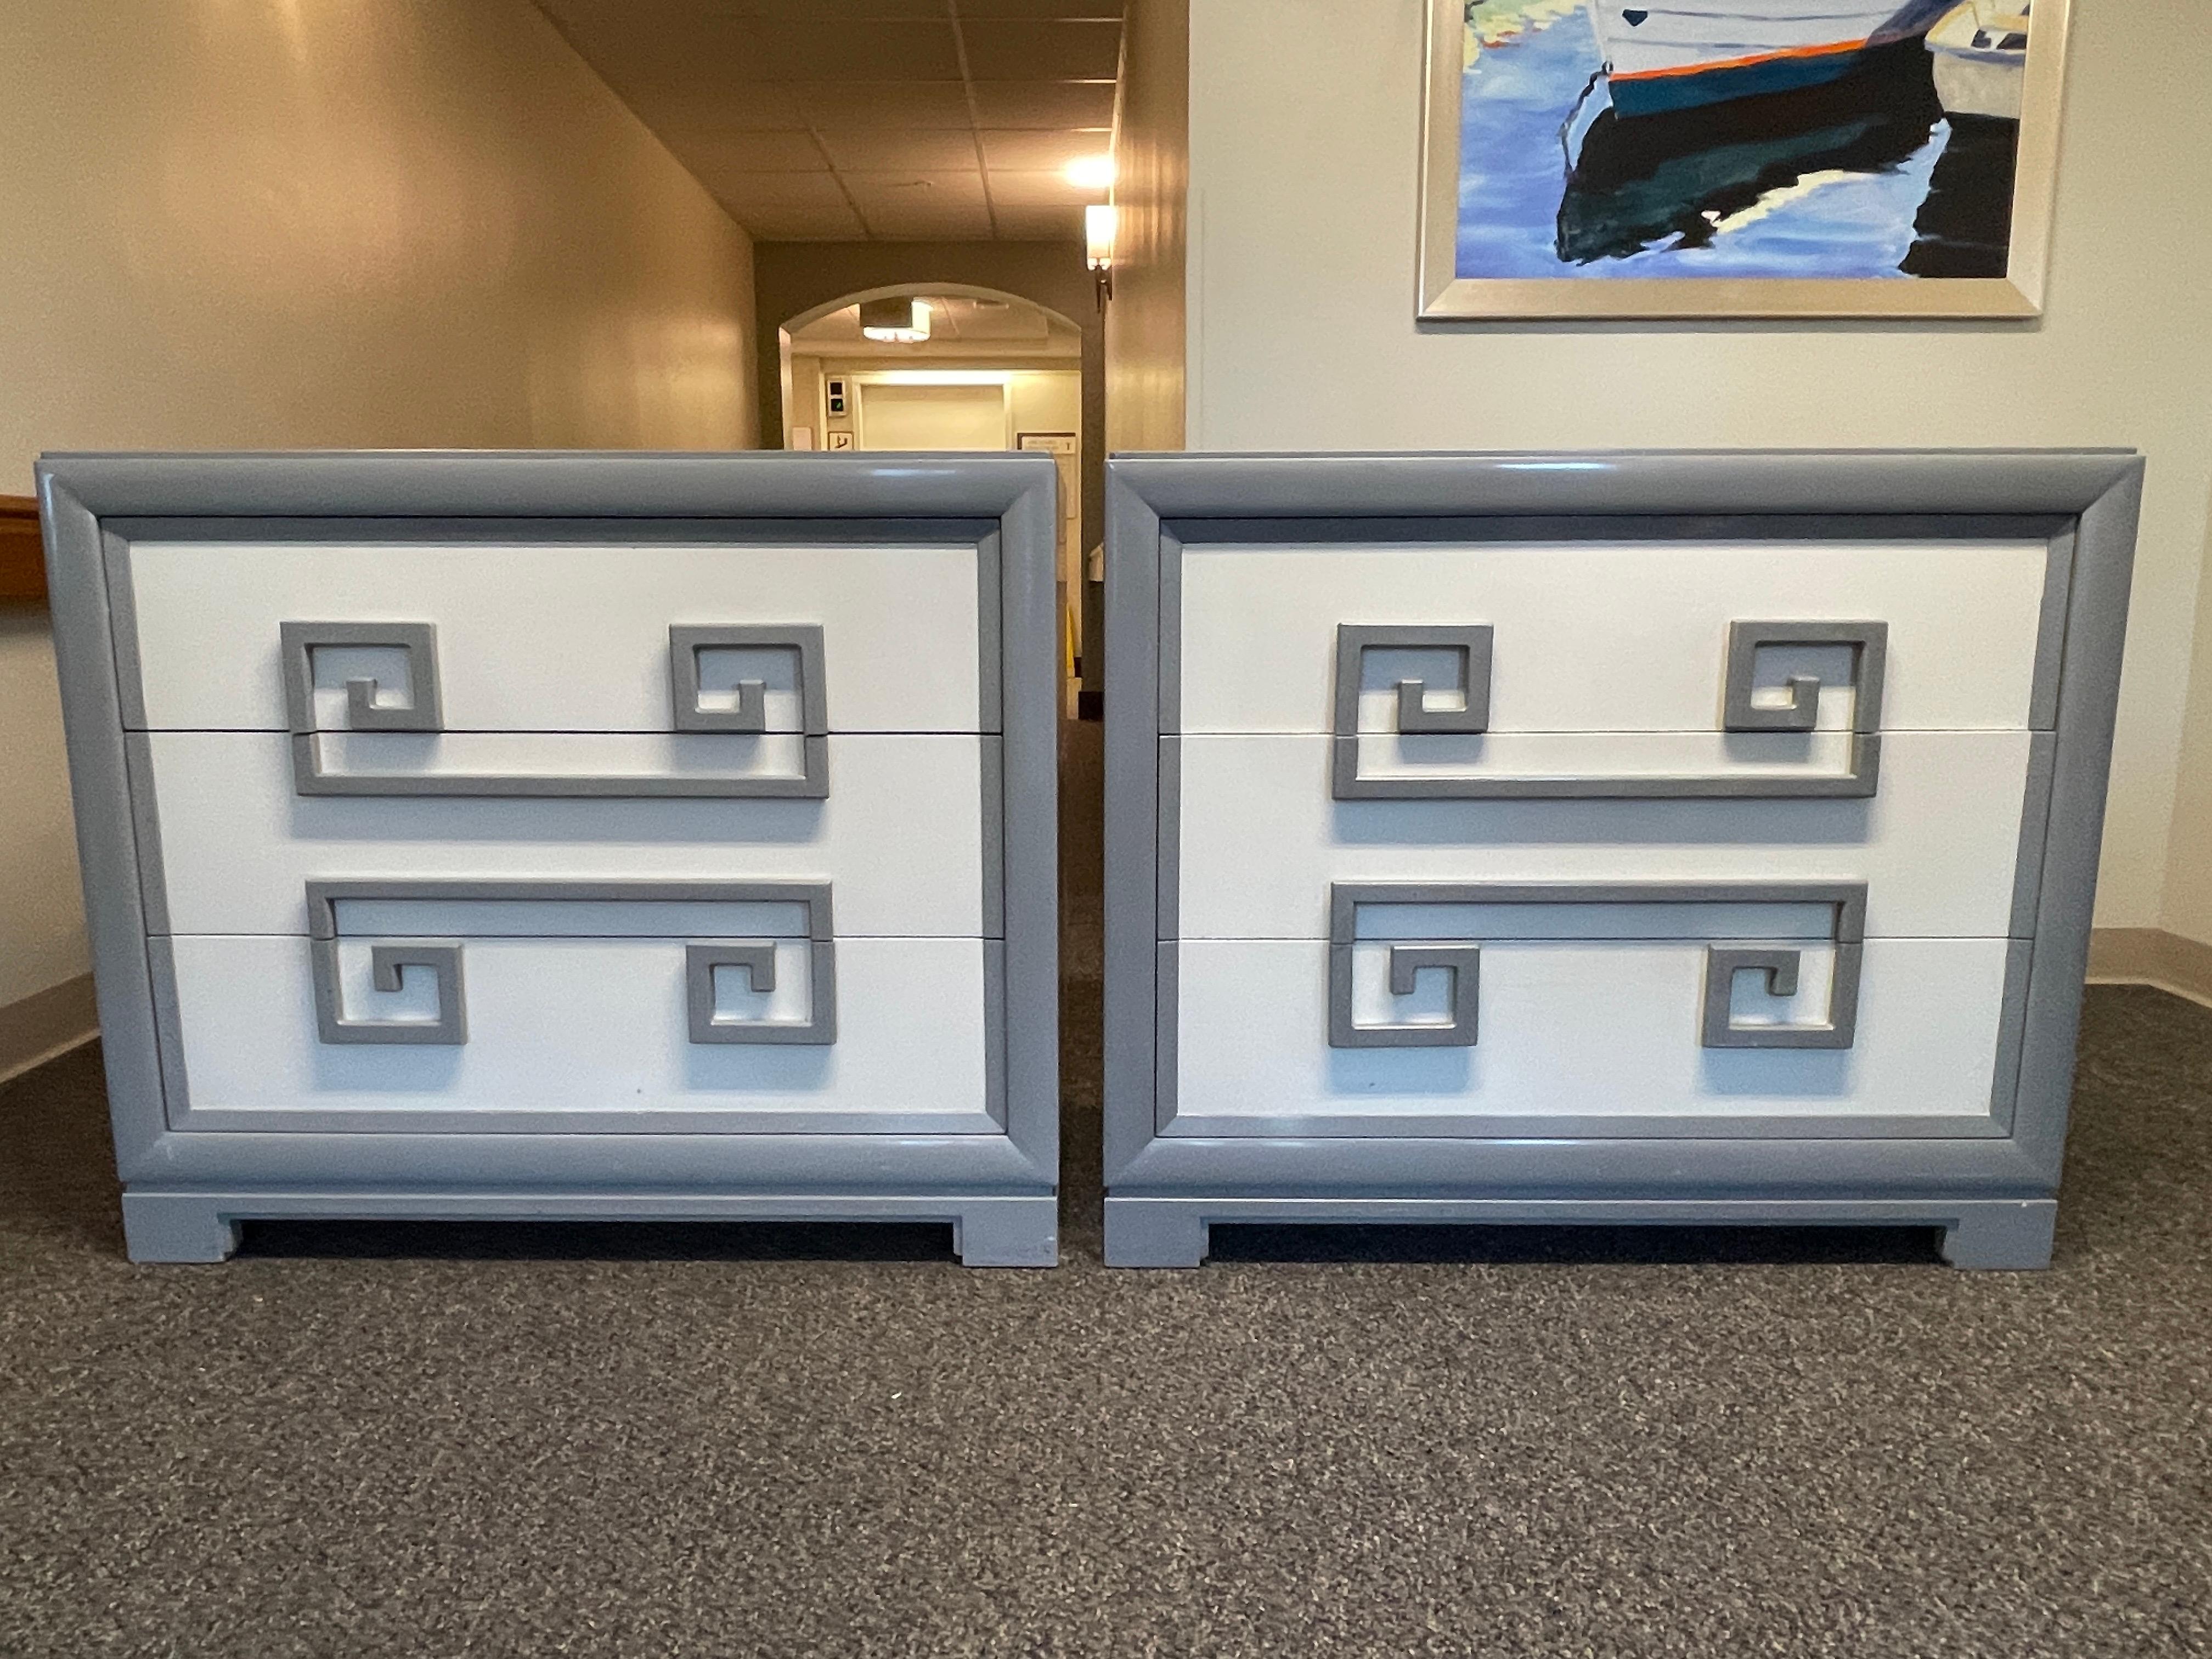 Pair of original three drawer chests by Kittinger of Buffalo from their modernist Mandarin collection, 1947.
Boldly contrasting Greek key design integrated into drawer pulls.
Glass tops, deep divided drawers with vide poche sliding tray.
Putty grey